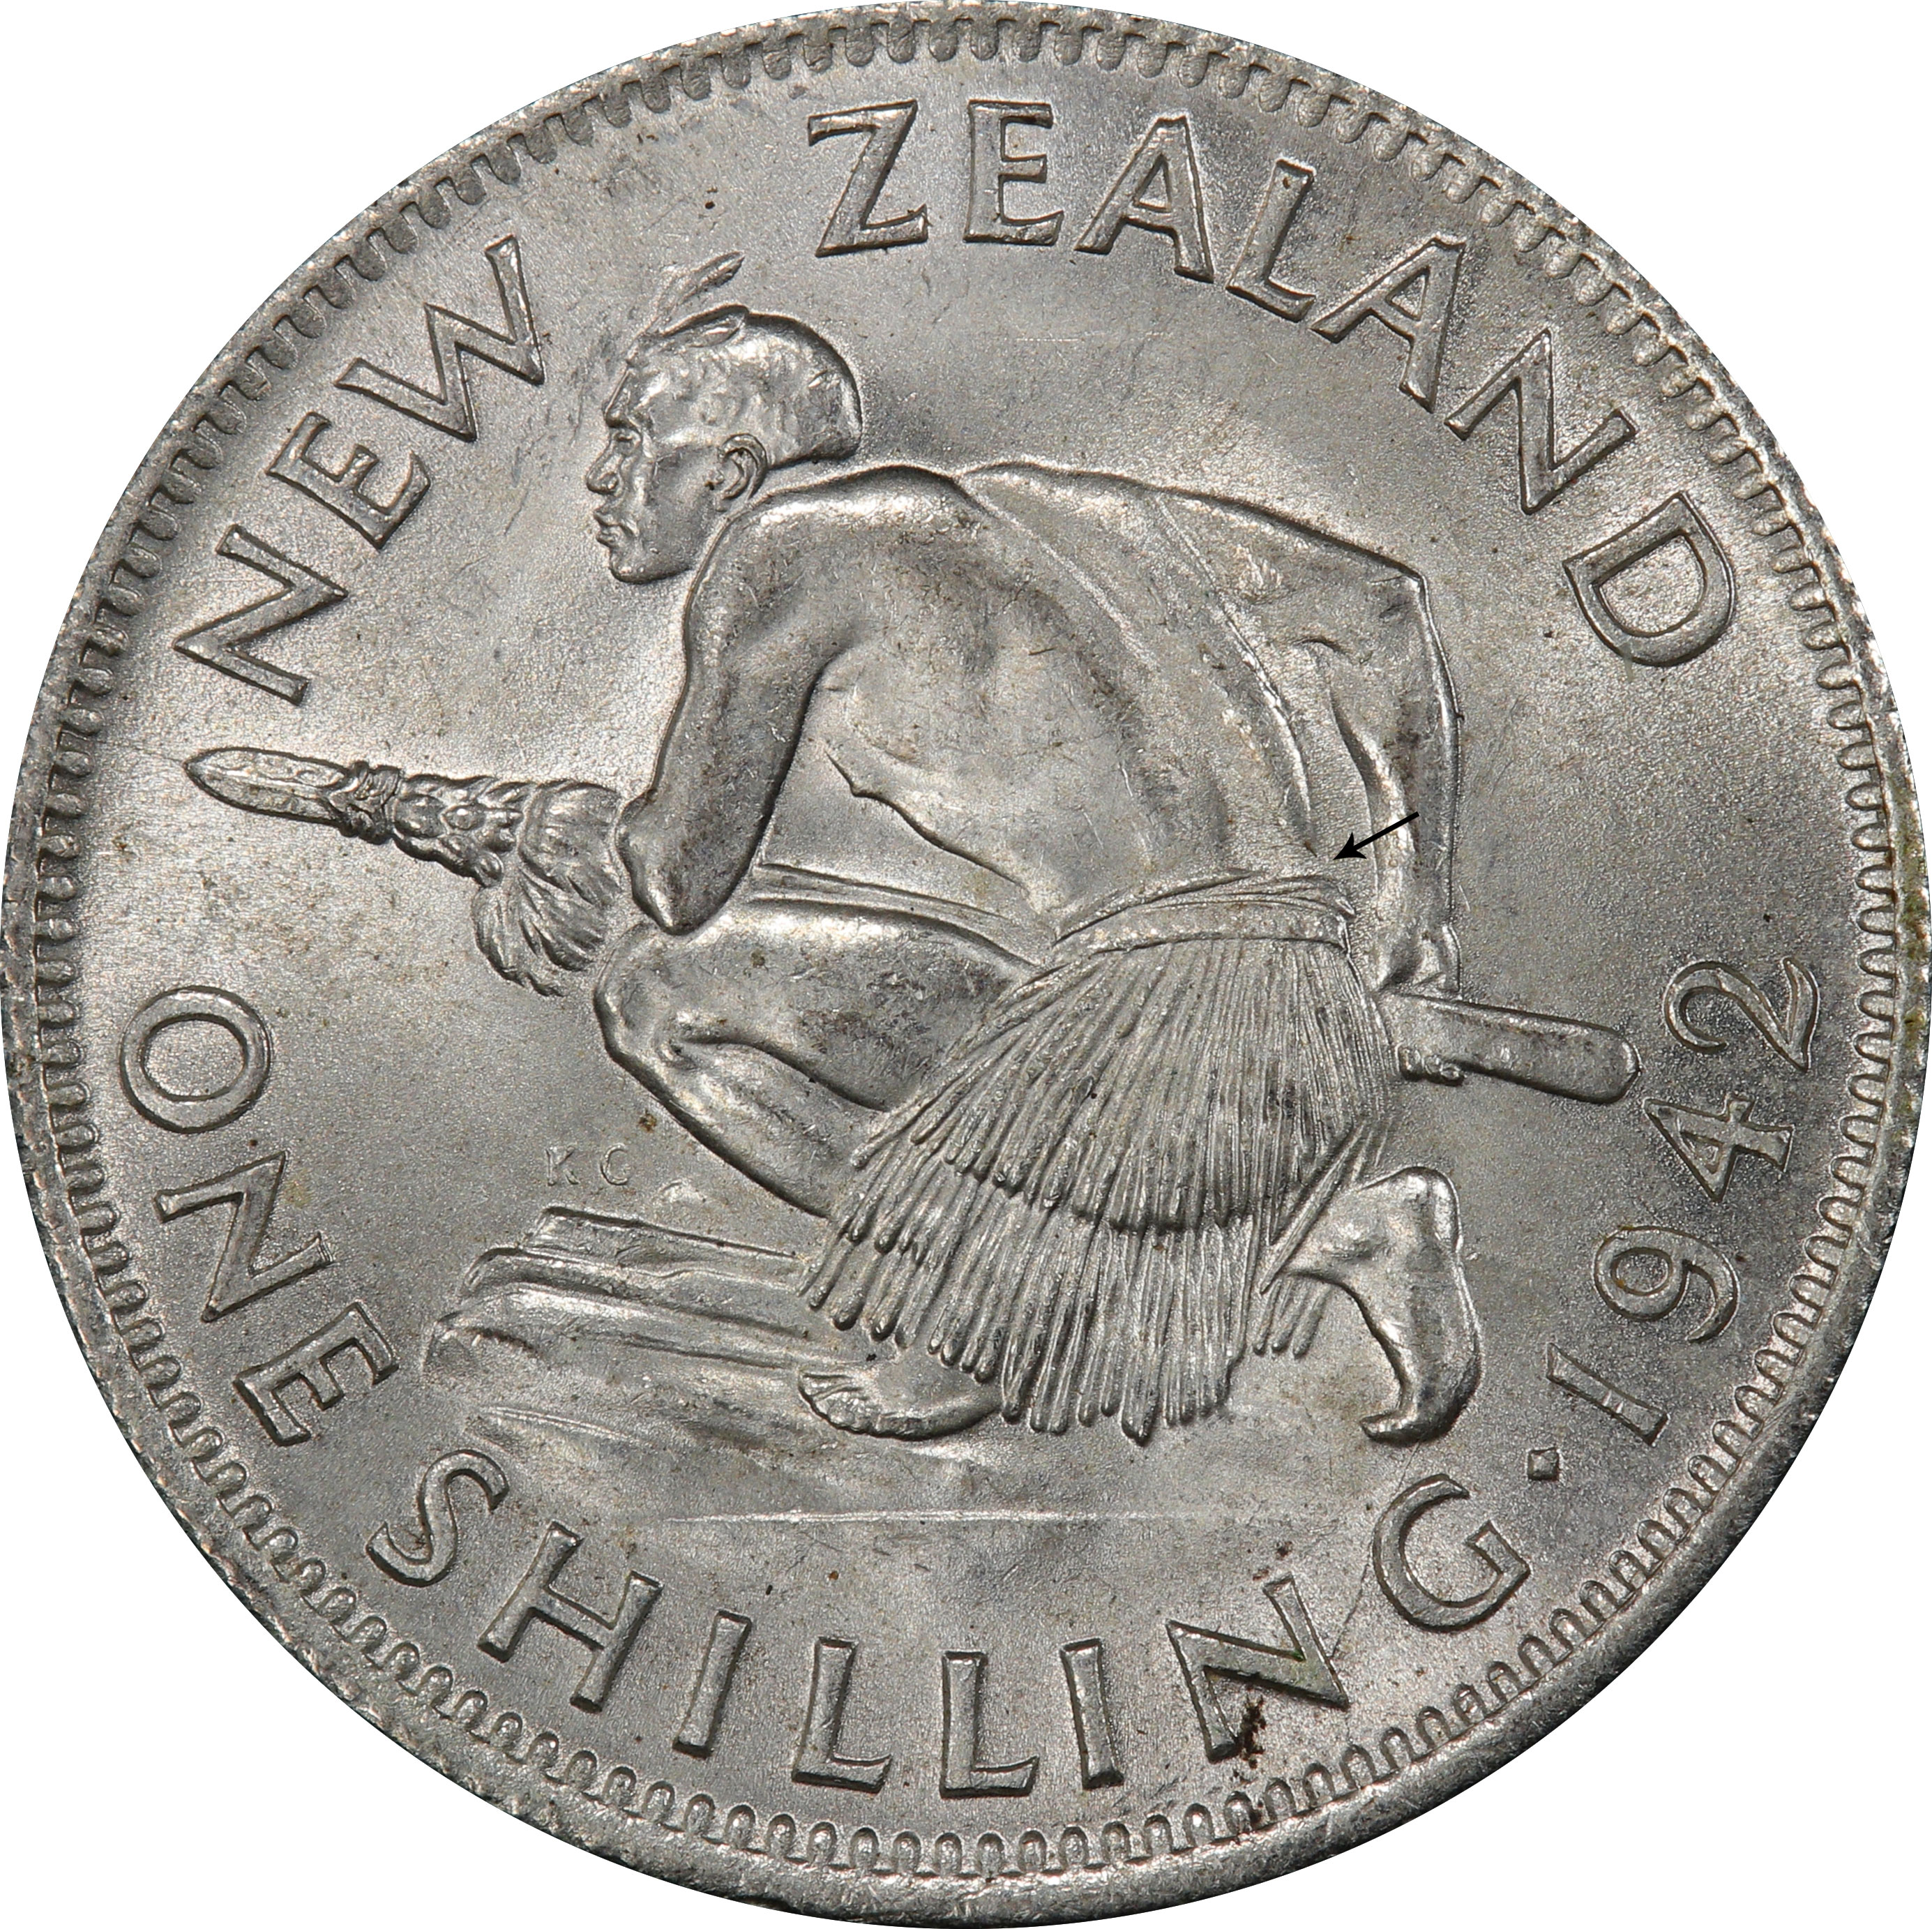 Shilling 1942 - New Zealand coin